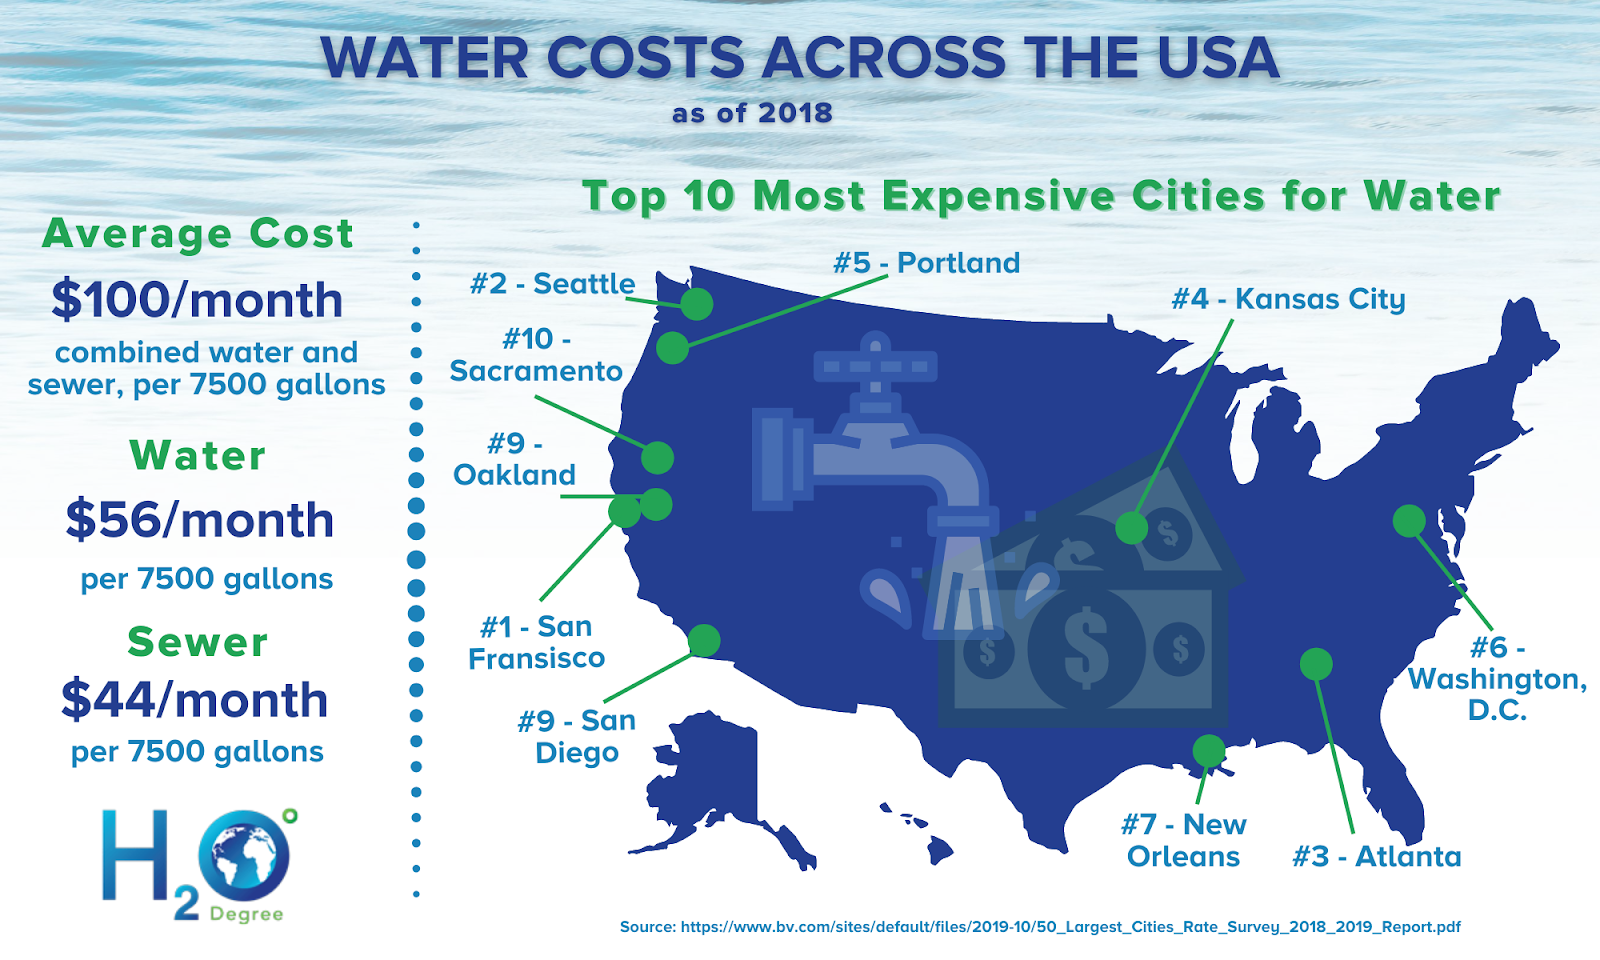 Infographic showing water costs across the USA.